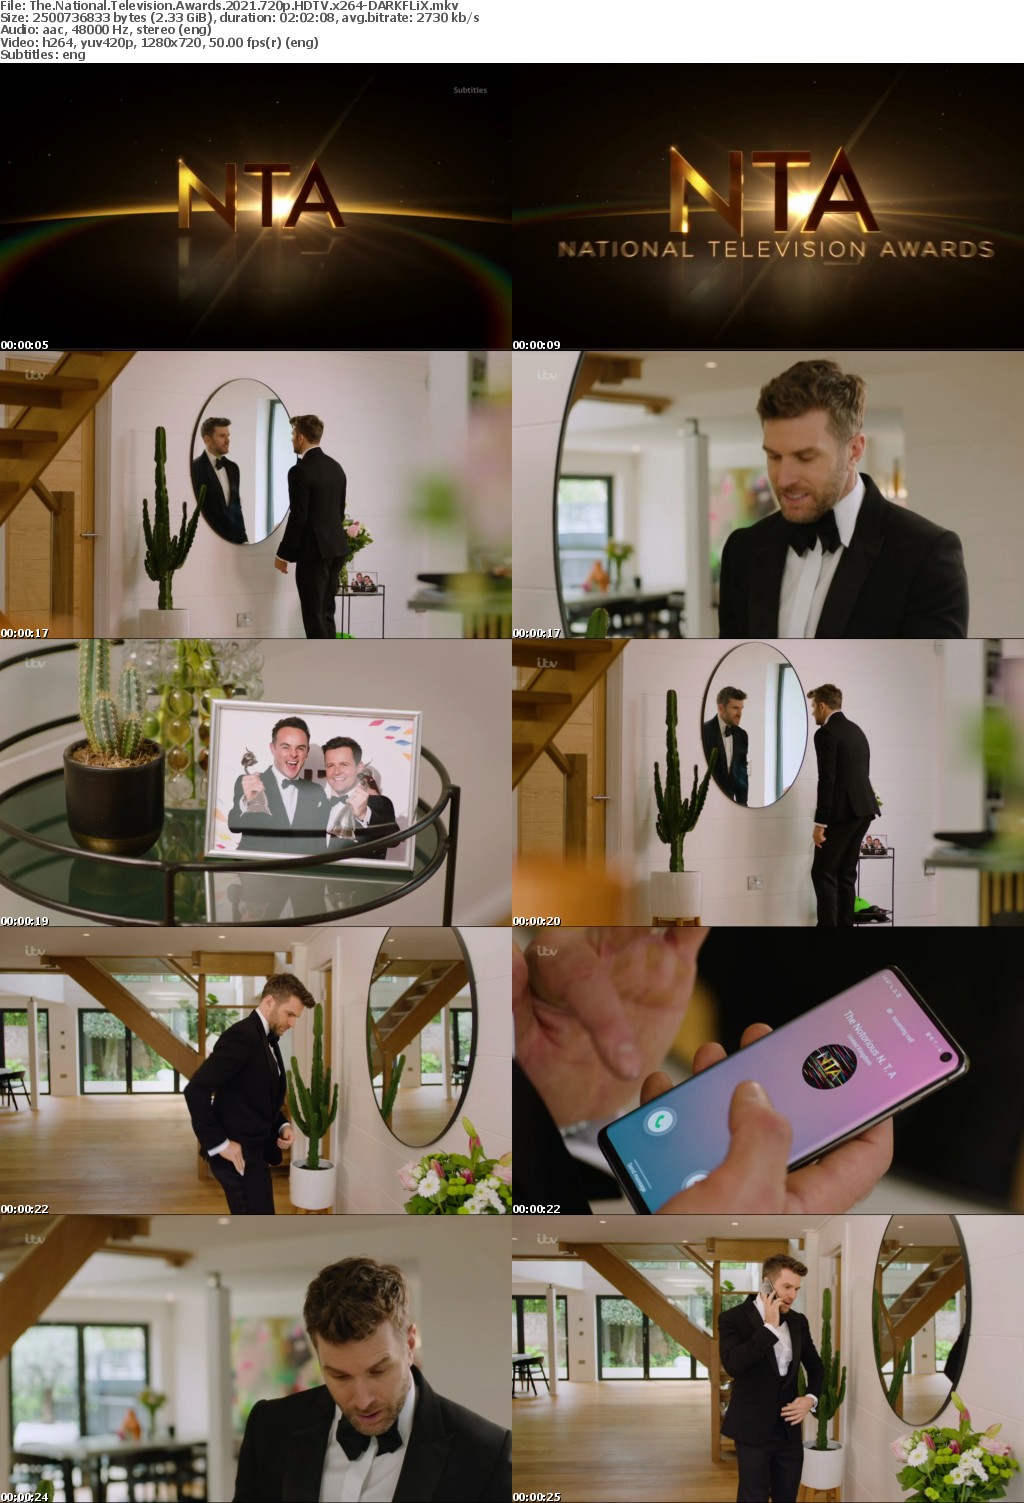 The National Television Awards 2021 720p HDTV x264-DARKFLiX